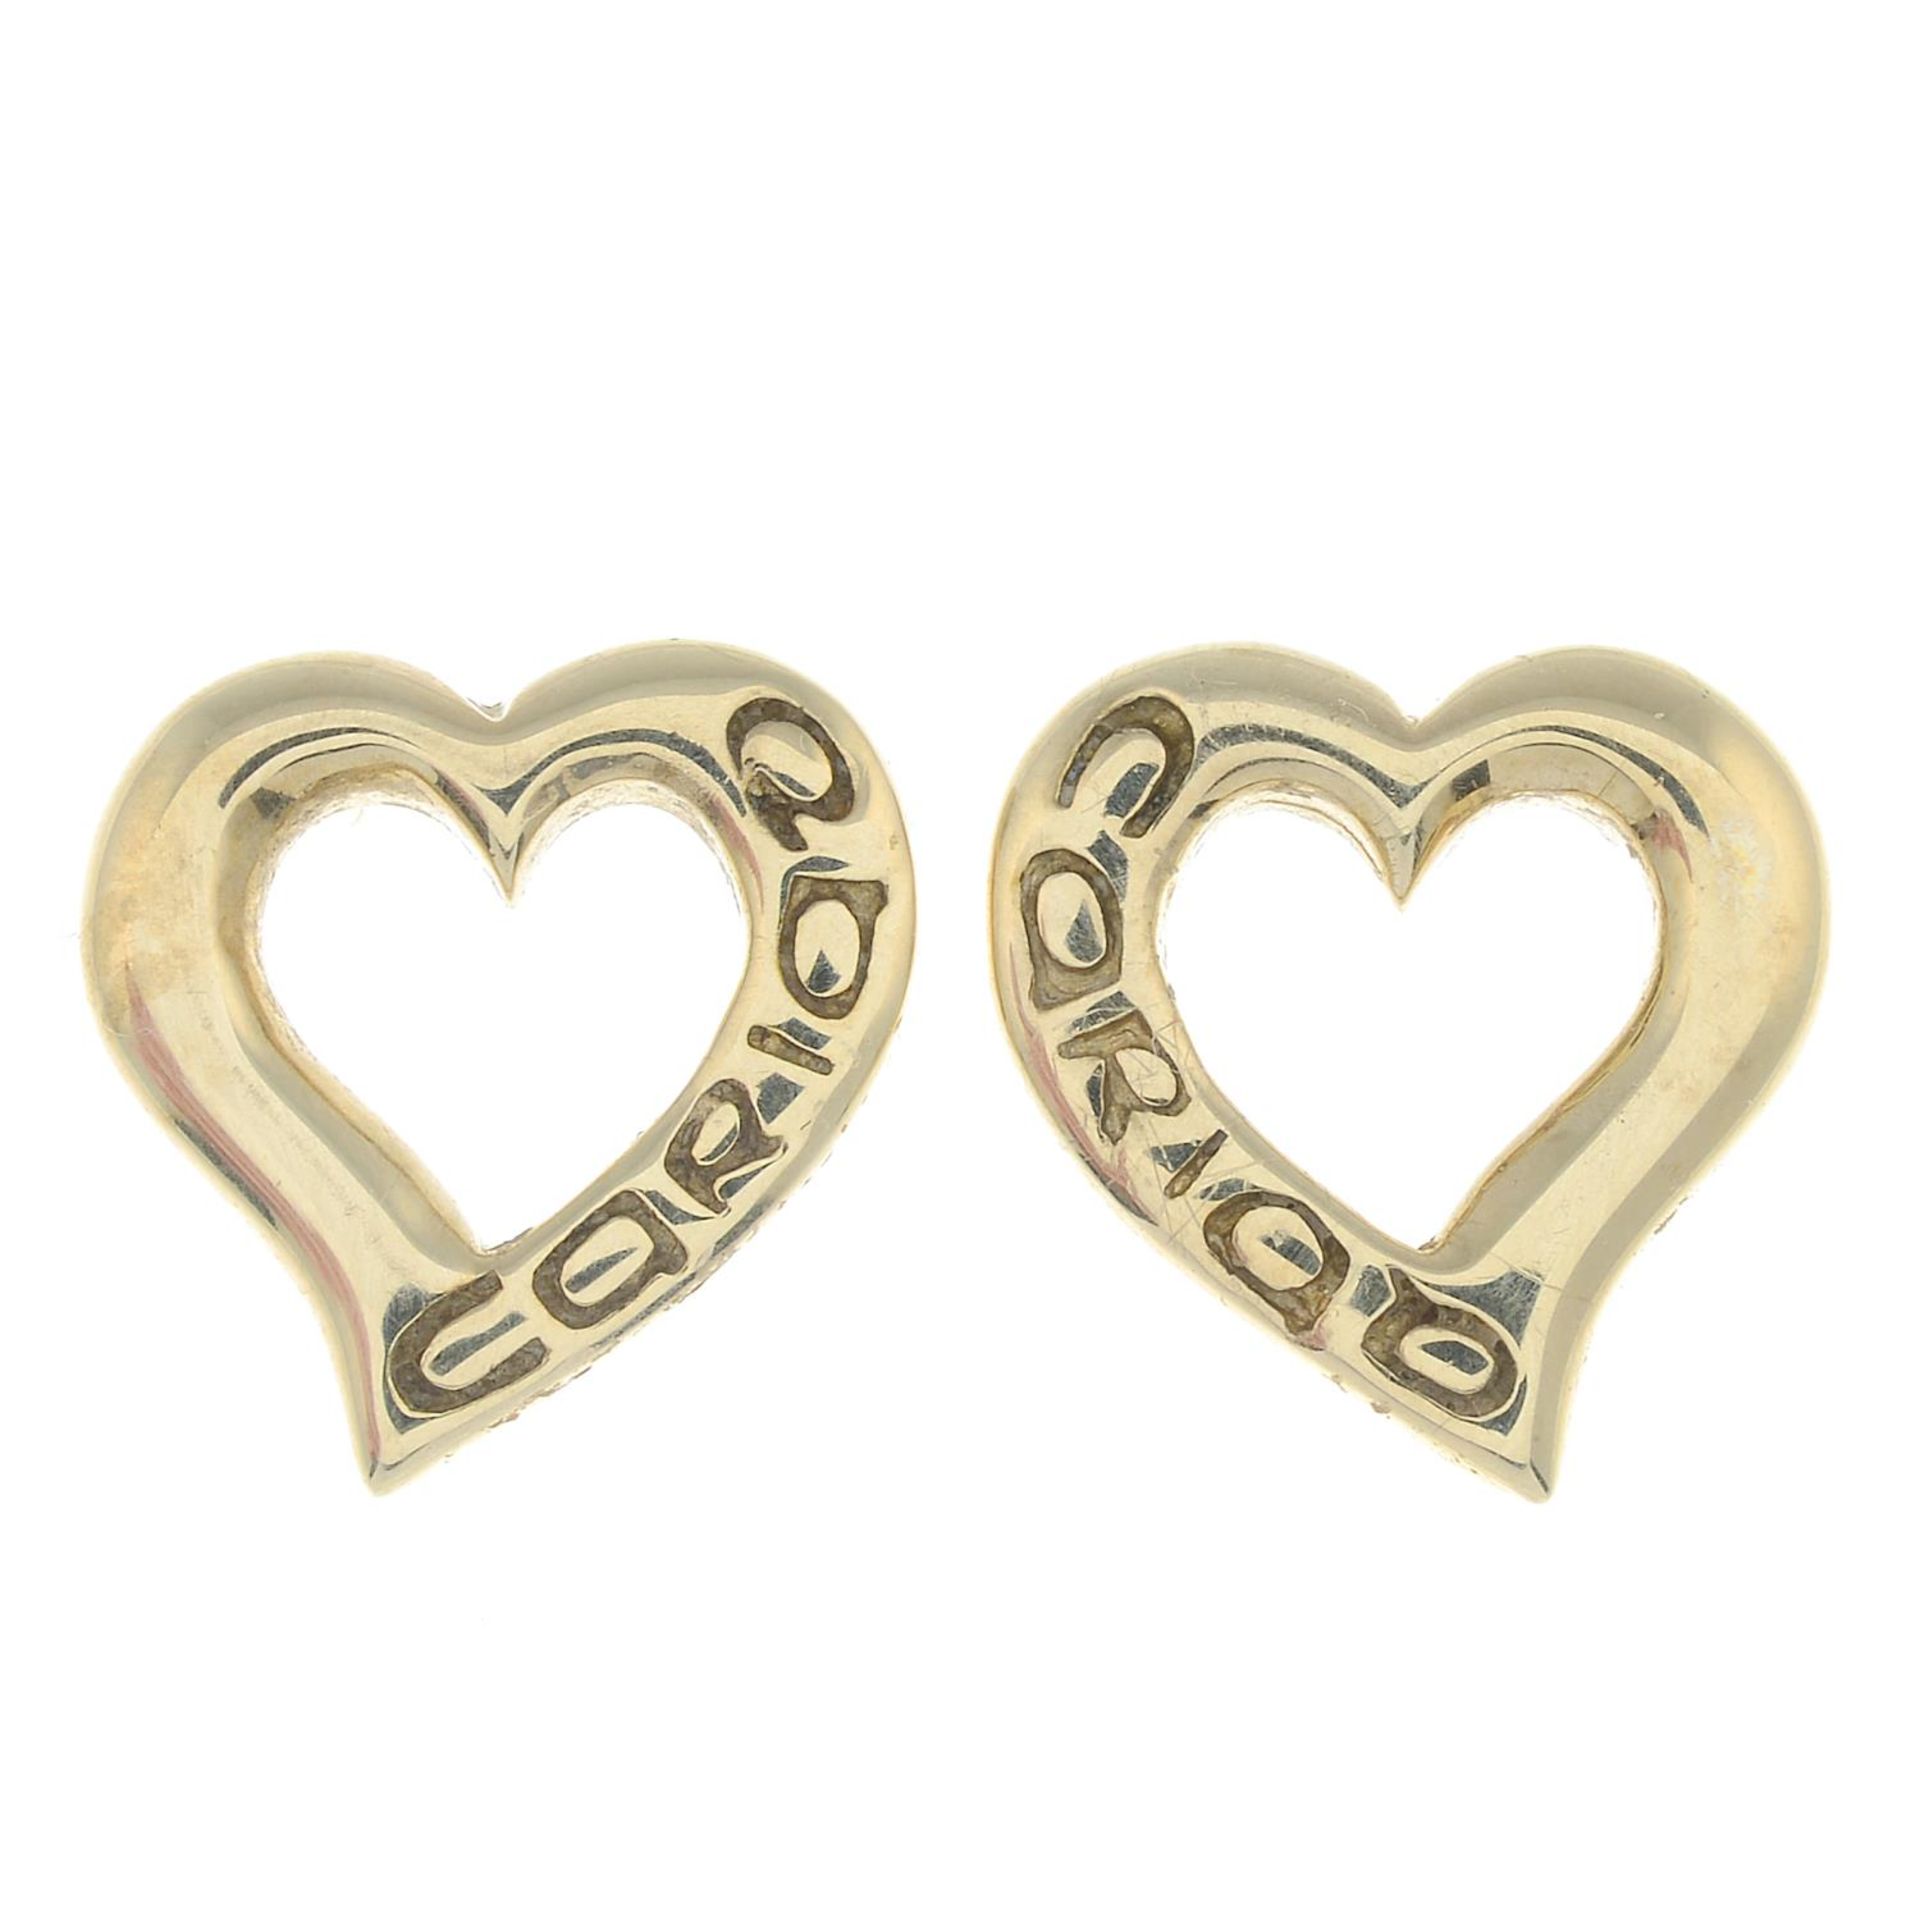 A set of 9ct gold 'Cariad' jewellery, by Clogau.